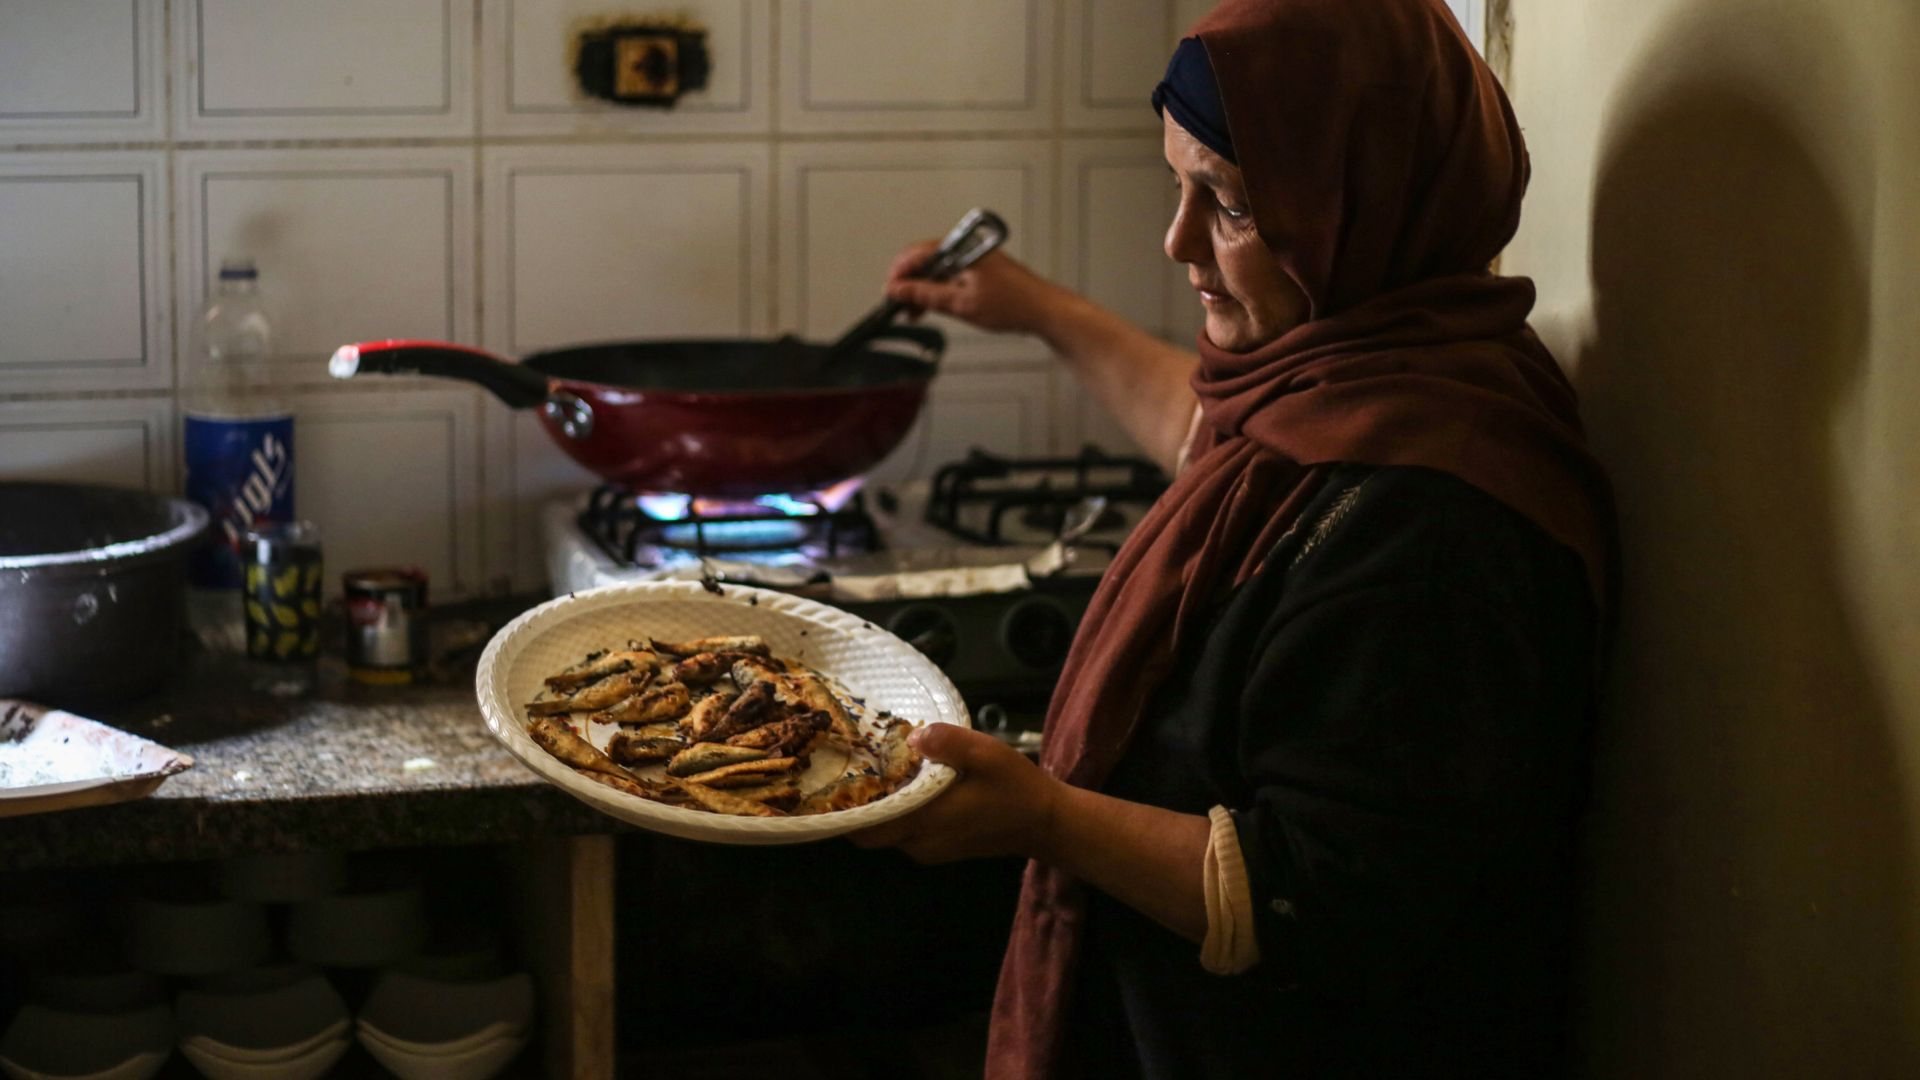 Khadr's mother stands by the stove lifting hot, freshly fried sardines out of a wok and onto a plate